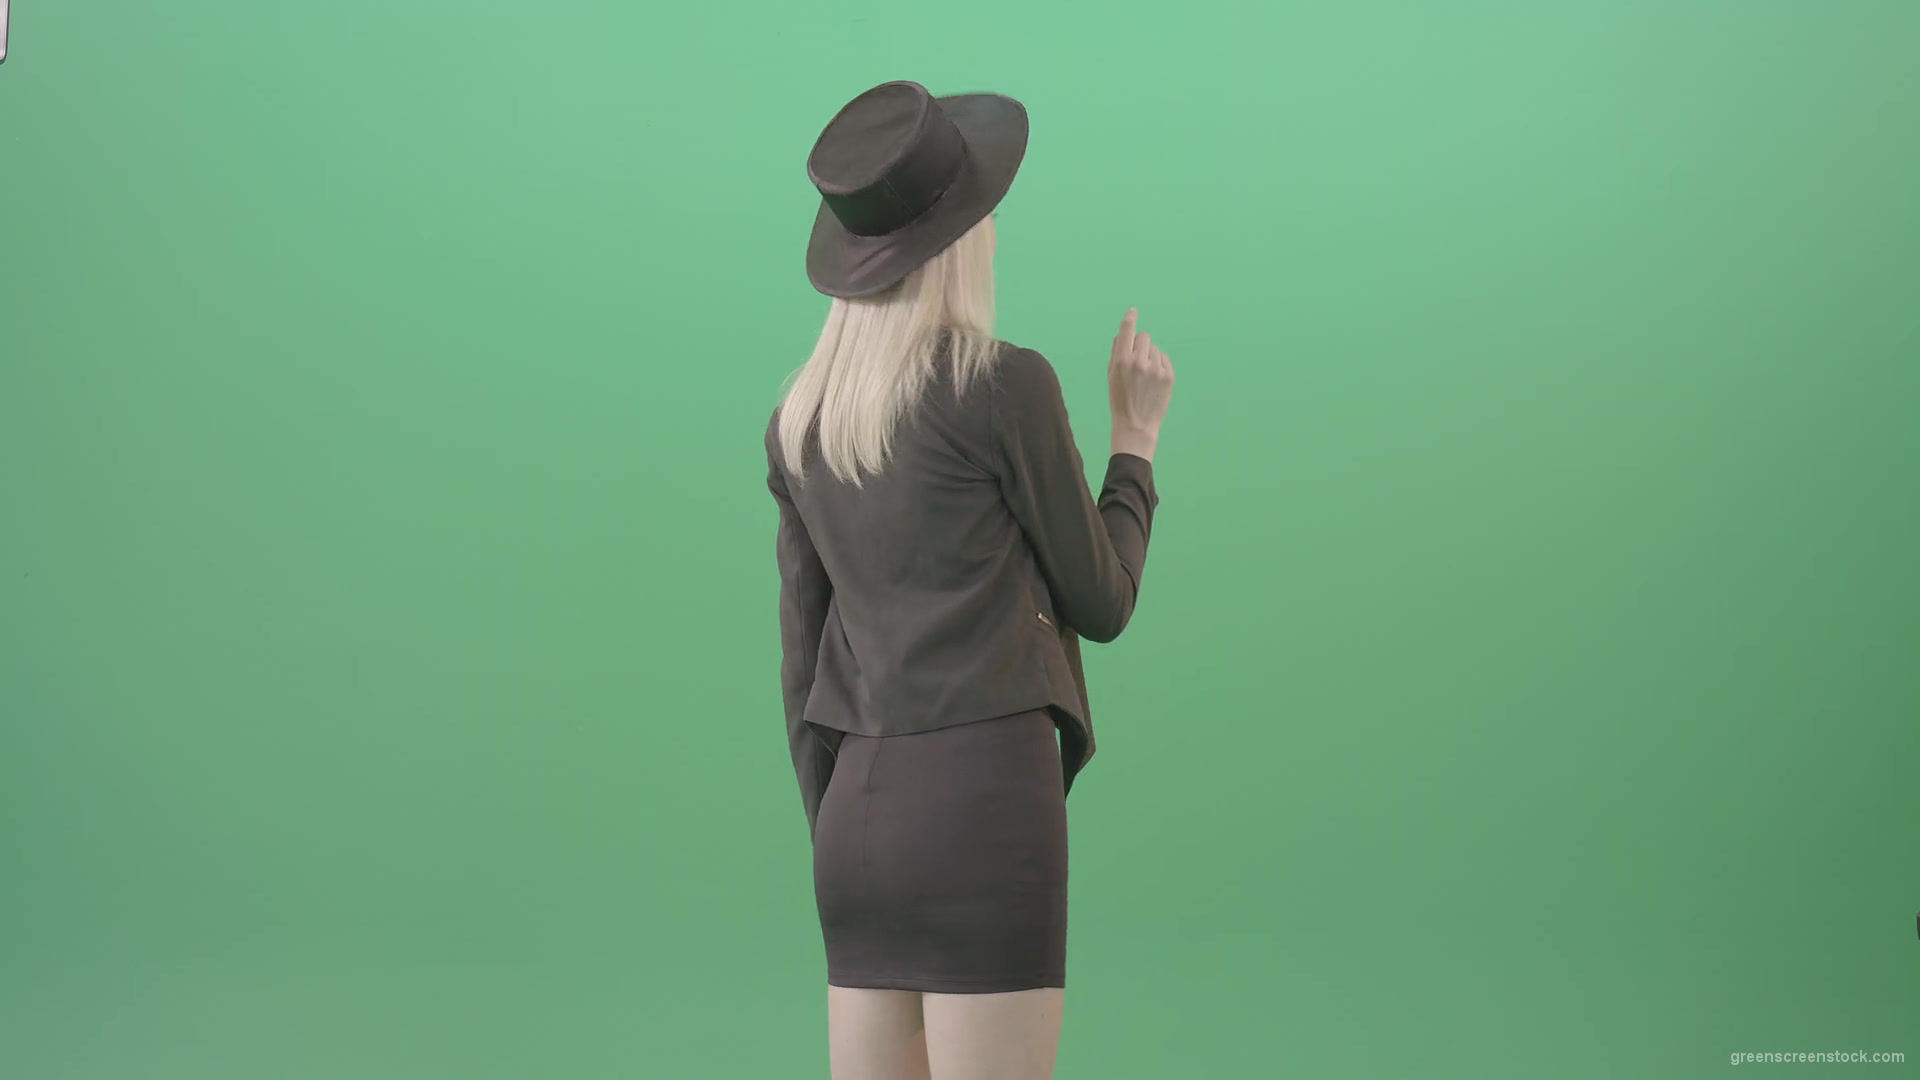 Blonde-Girl-looking-digital-virtual-products-on-touch-screen-from-back-side-4K-Green-Screen-Video-Footage-1920_009 Green Screen Stock